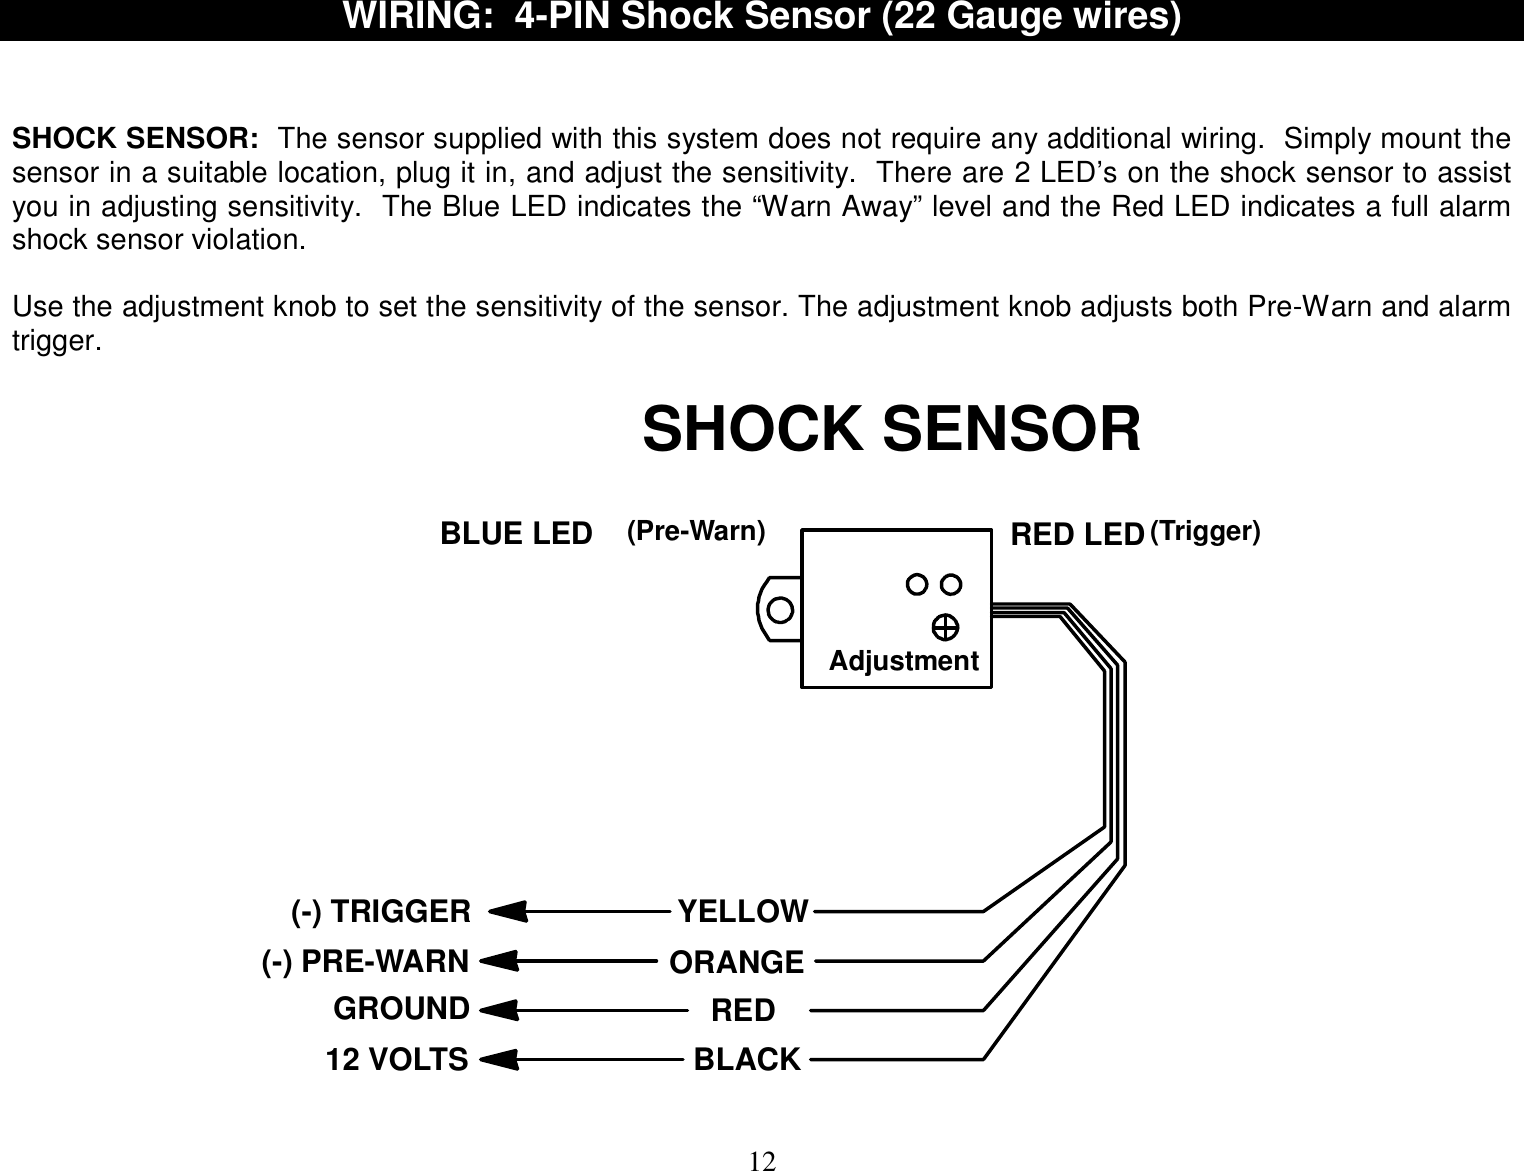  12 WIRING:  4-PIN Shock Sensor (22 Gauge wires)     SHOCK SENSOR:  The sensor supplied with this system does not require any additional wiring.  Simply mount the sensor in a suitable location, plug it in, and adjust the sensitivity.  There are 2 LED’s on the shock sensor to assist you in adjusting sensitivity.  The Blue LED indicates the “Warn Away” level and the Red LED indicates a full alarm shock sensor violation.  Use the adjustment knob to set the sensitivity of the sensor. The adjustment knob adjusts both Pre-Warn and alarm trigger.  BLUE LED RED LED(-) PRE-WARN(-) TRIGGERGROUND12 VOLTSYELLOWORANGEBLACKRED(Trigger)(Pre-Warn)AdjustmentSHOCK SENSOR  